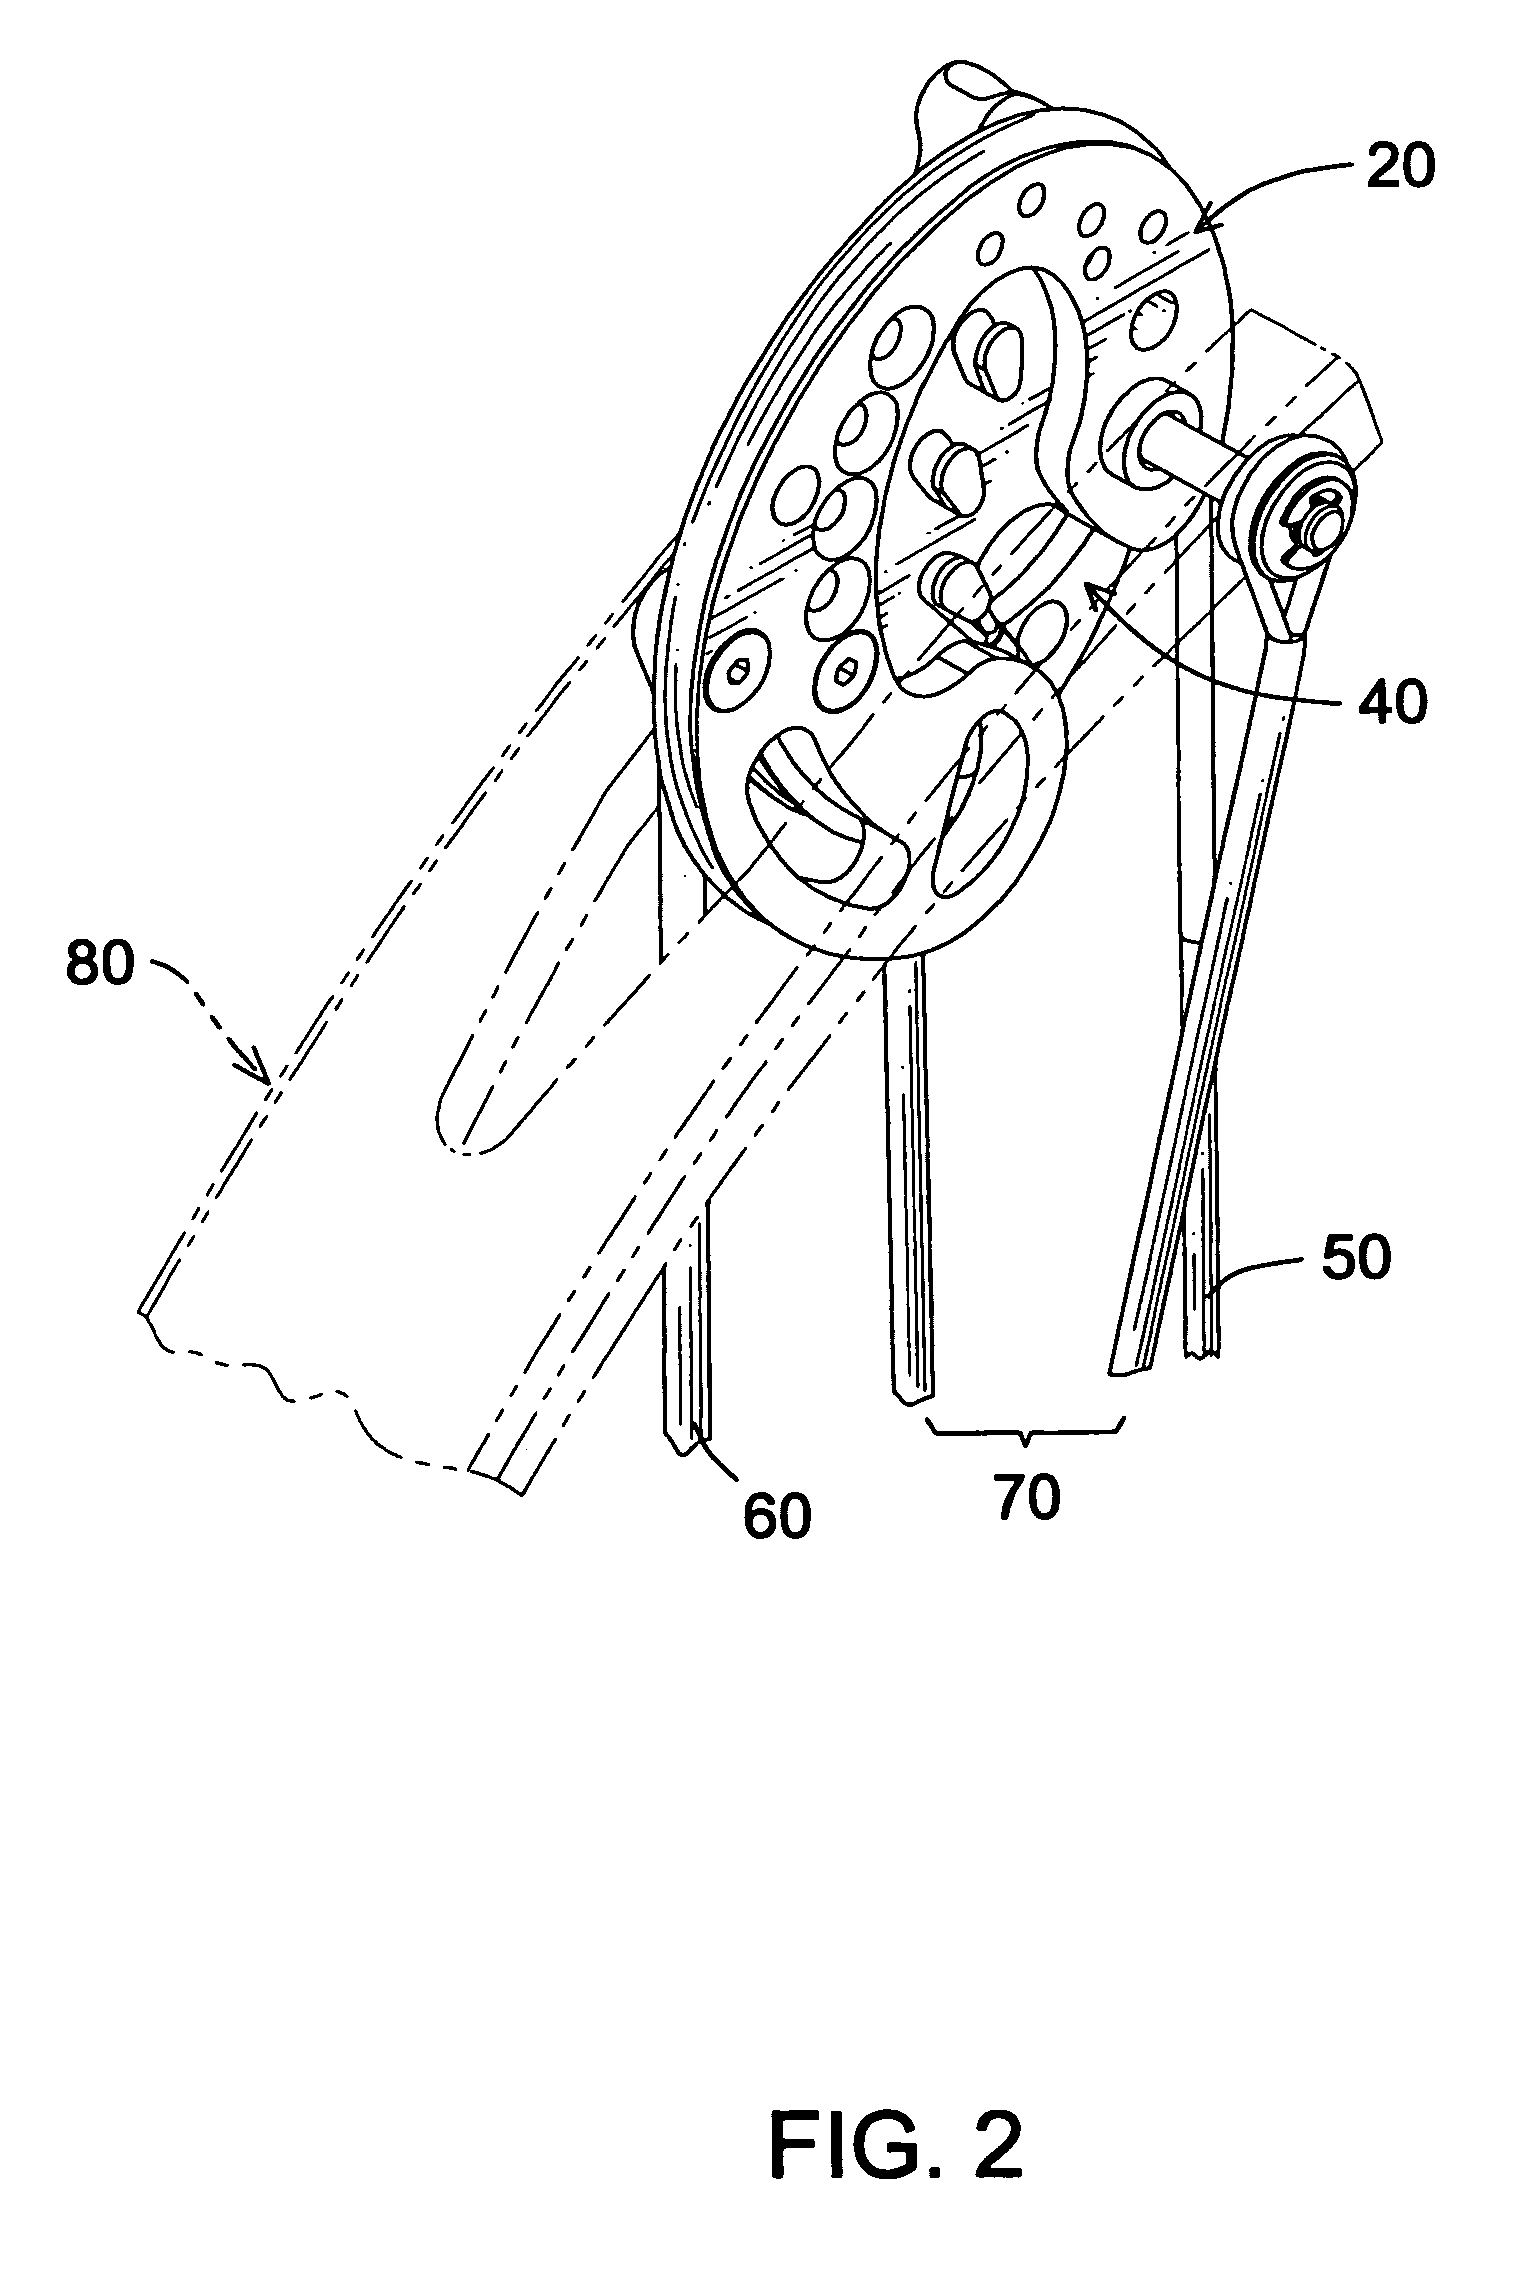 Adjustable cam for a crossbow